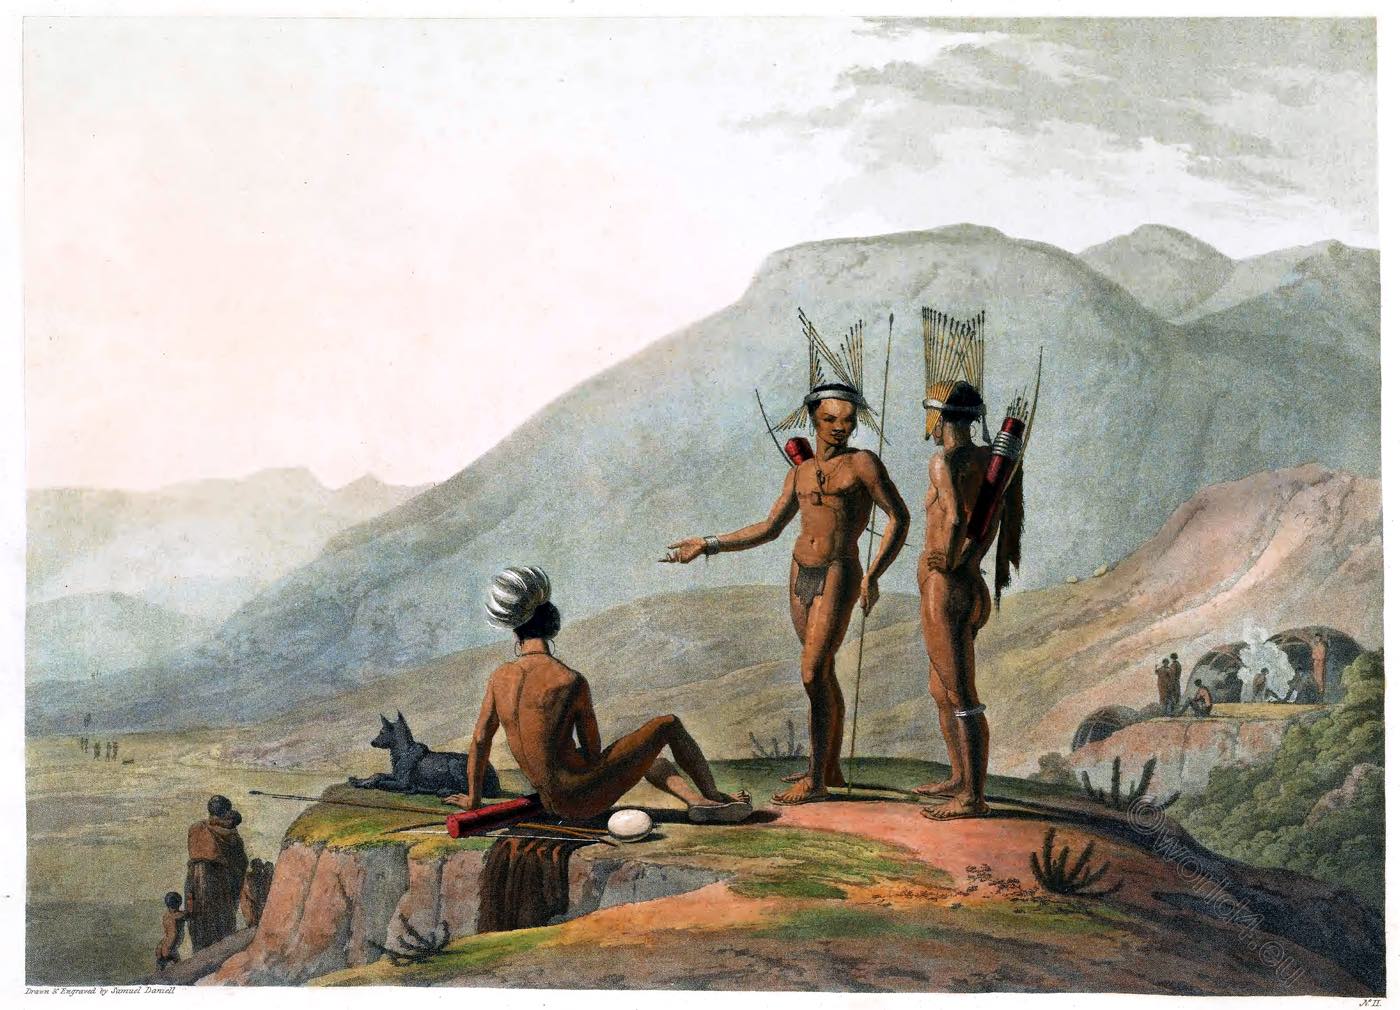 Armed San men about to set oﬀ on an expedition. Khoisan Peoples.